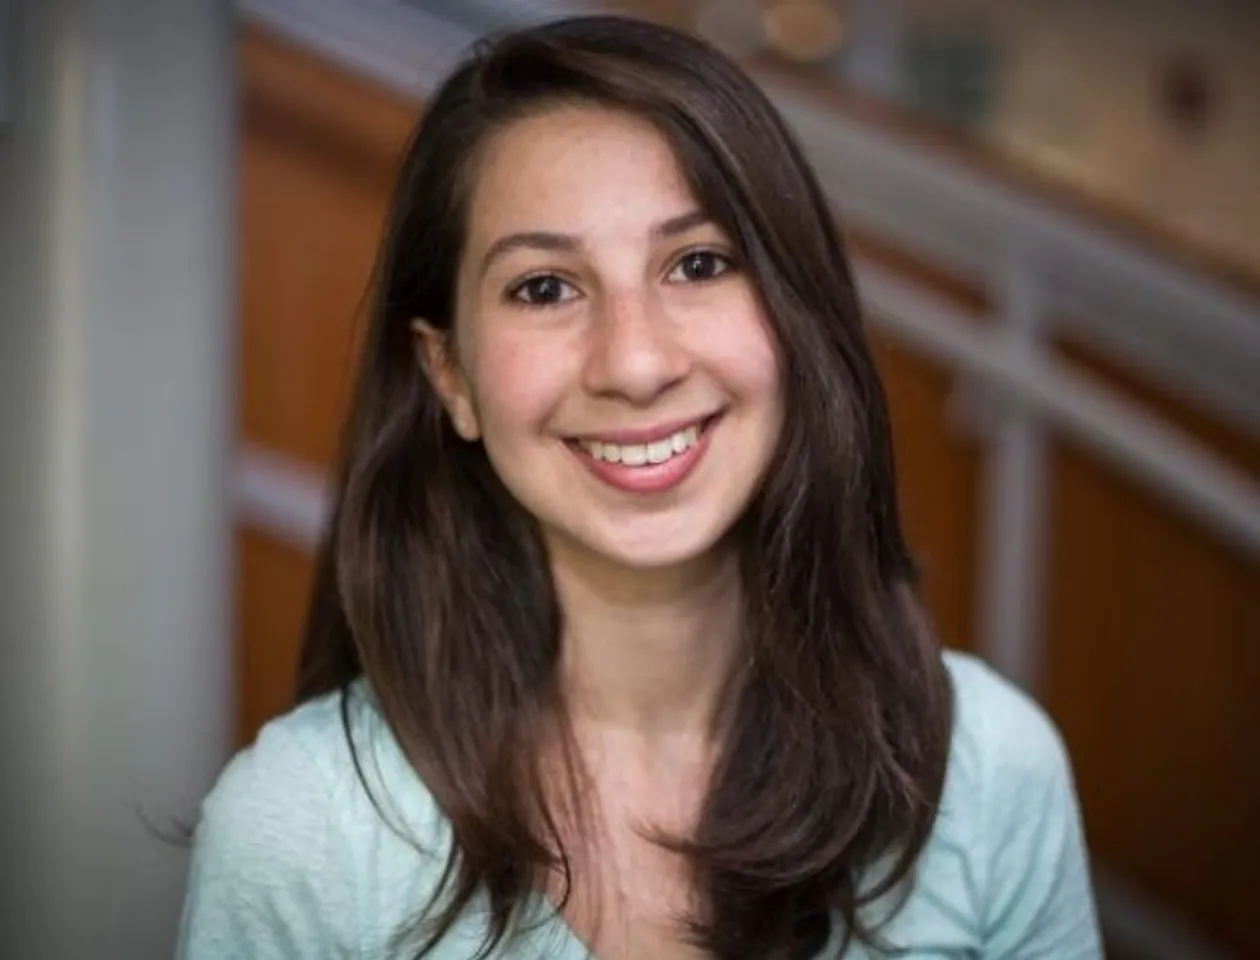 Katie Bouman Trolled: Why Her Success Is Unpalatable To Many